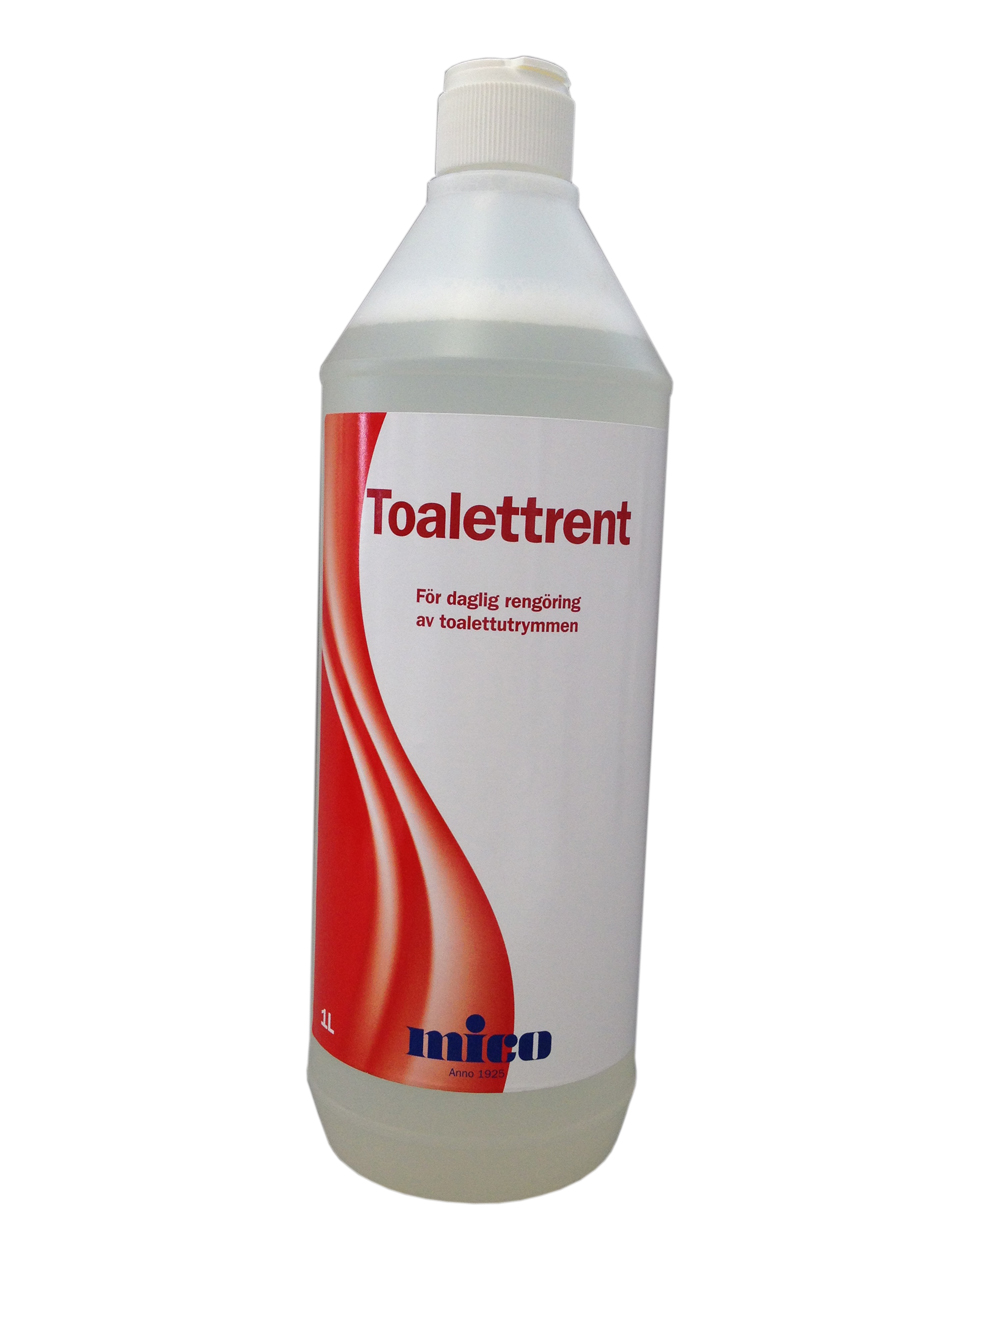 Mico Toalettrent rent 5L